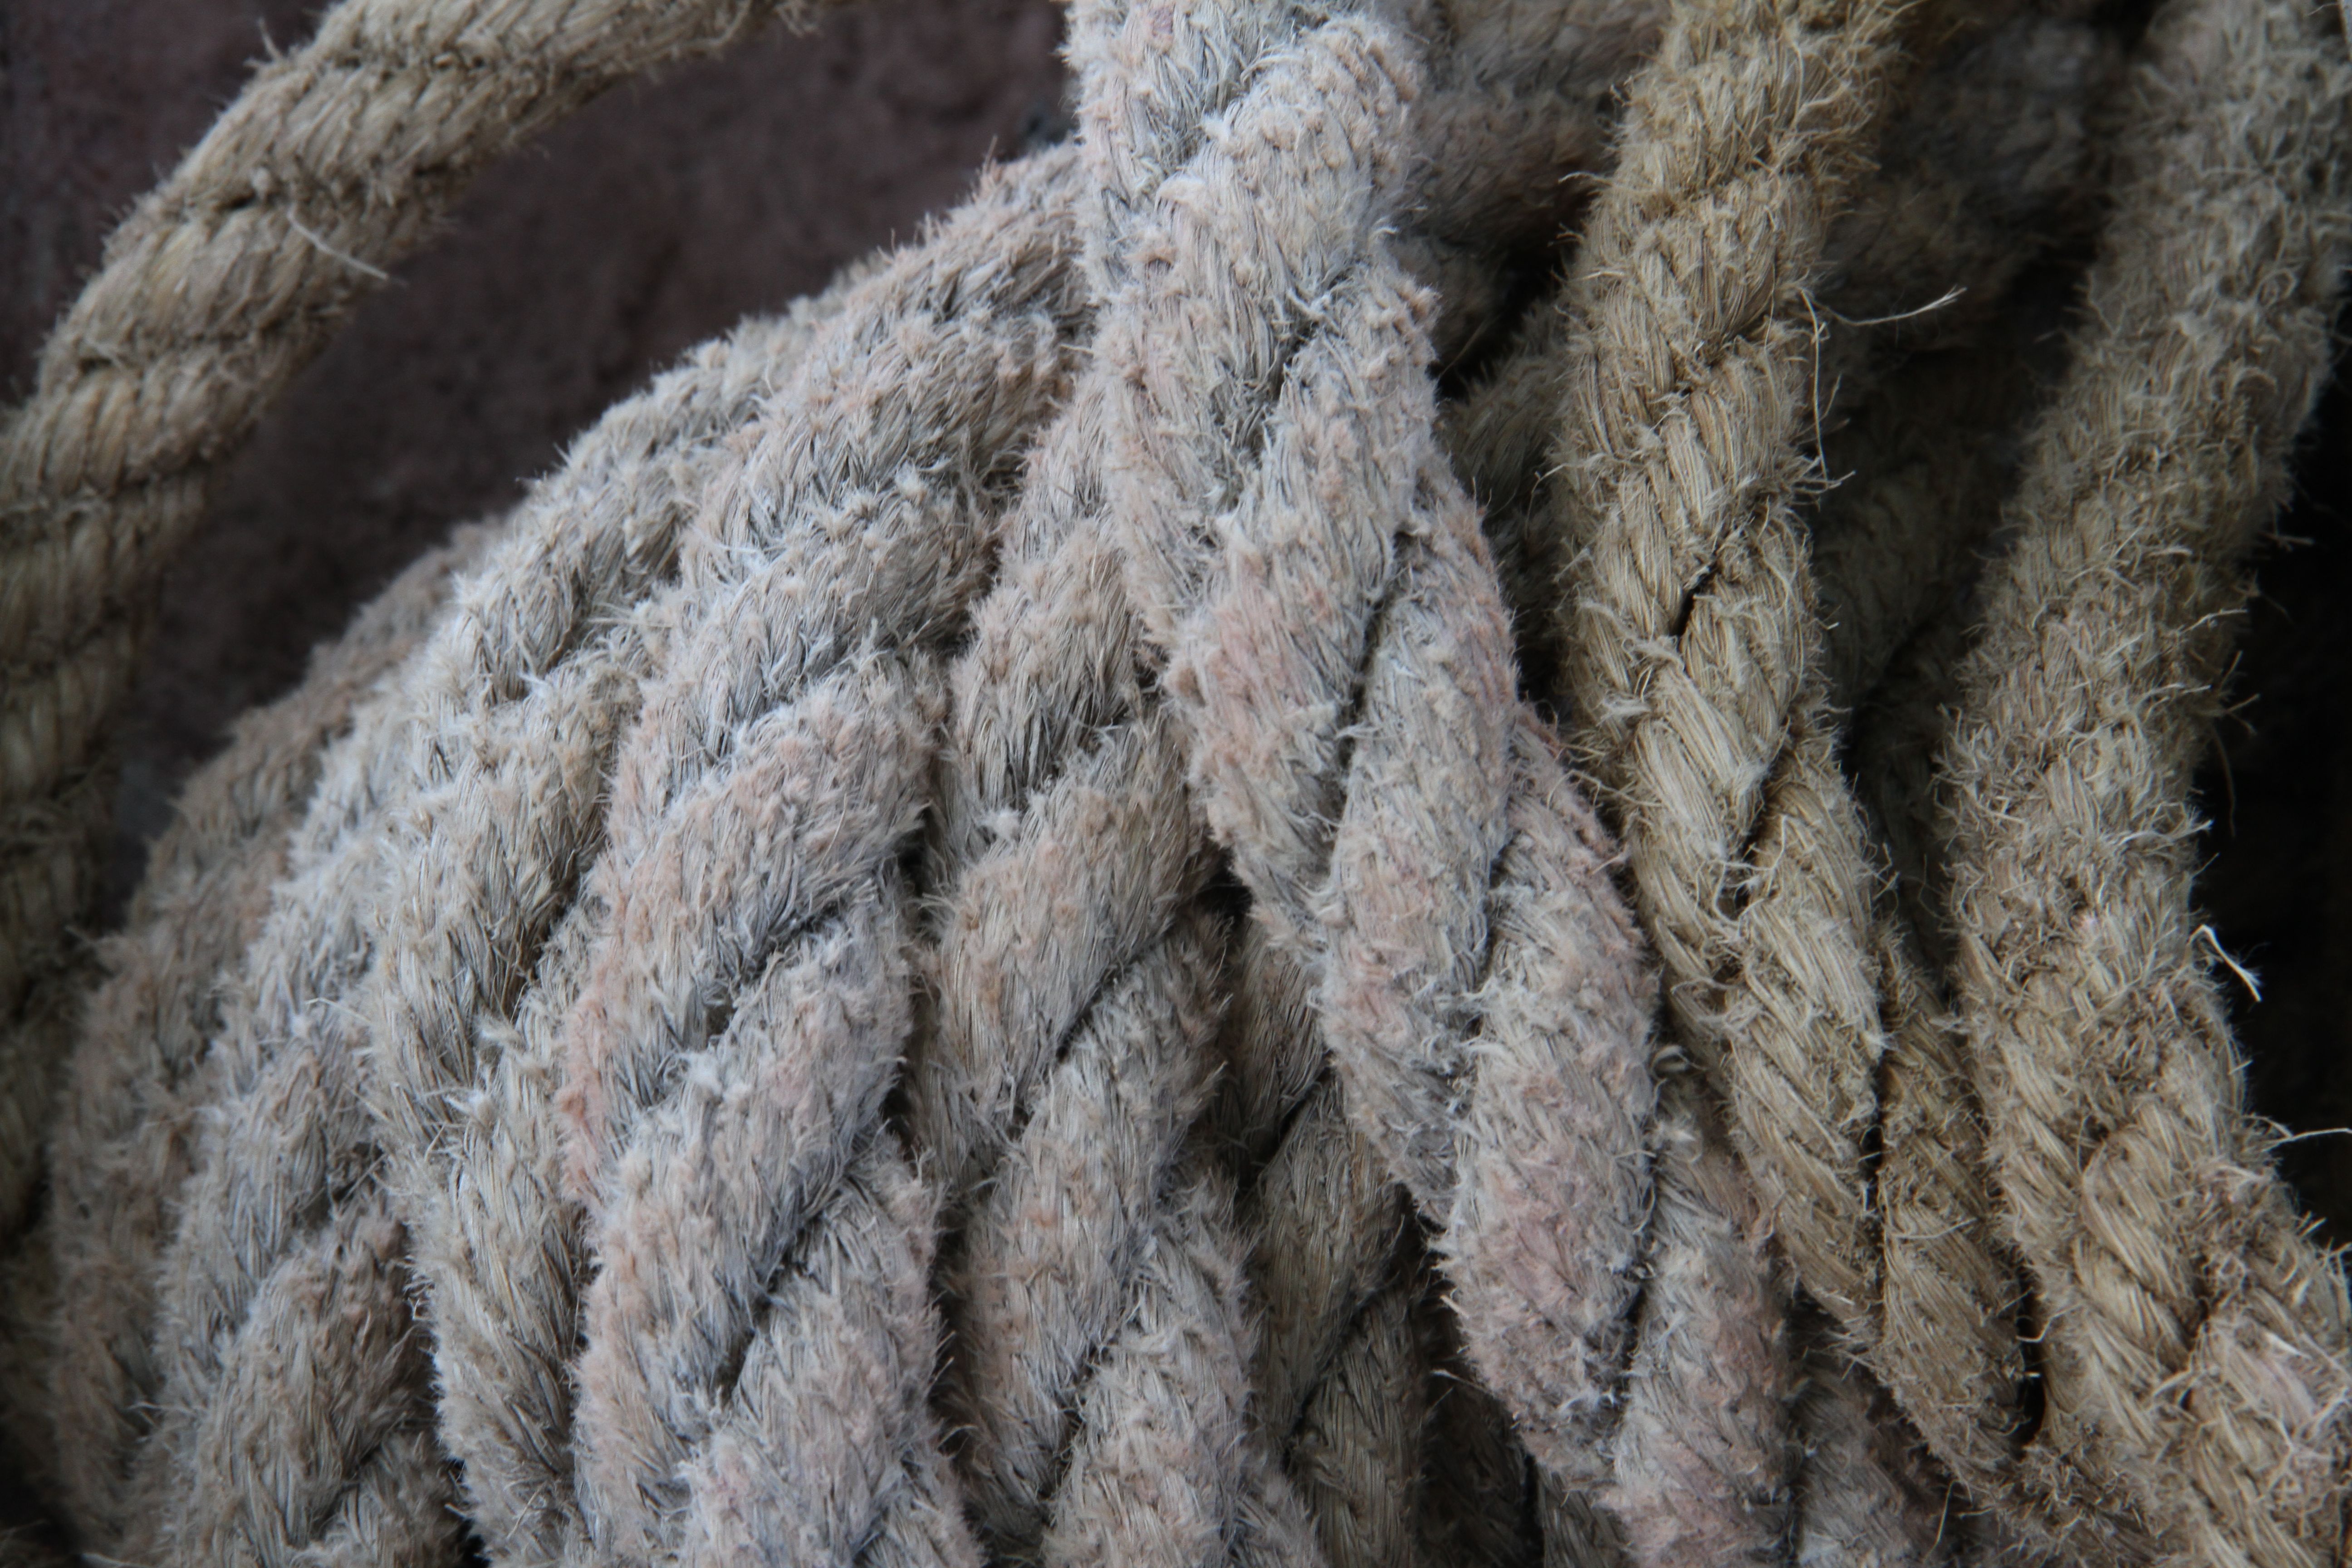 Beauty shot: this is the rope that they used for the pulley system. Love that dusty, stoney, chalky look it has.